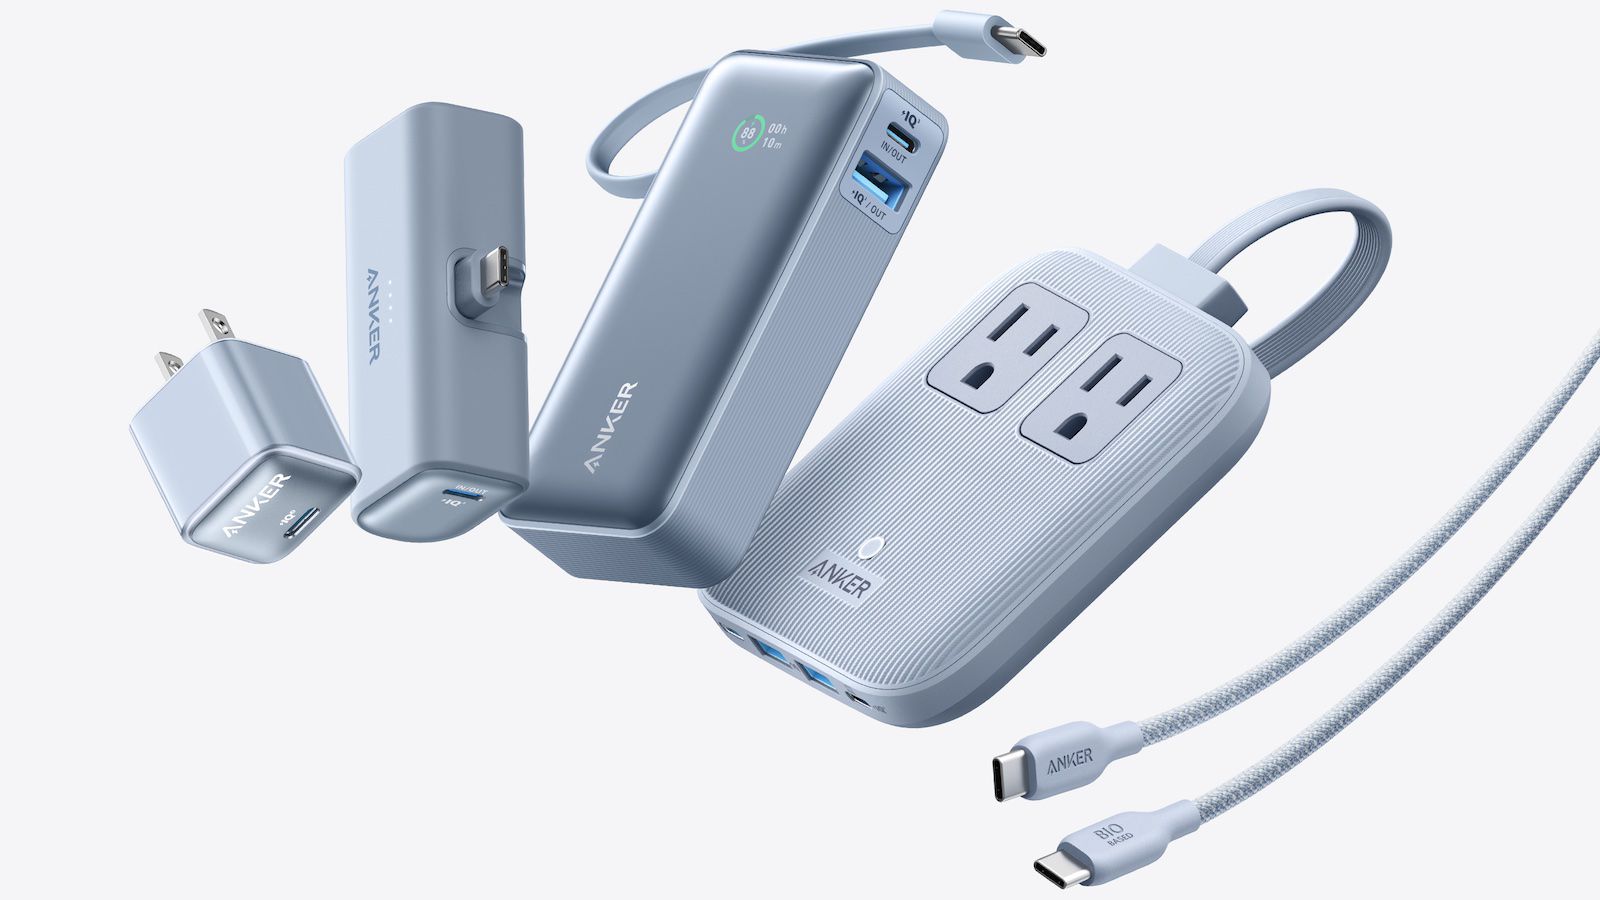 Anker's new MagGo MagSafe Power Bank now even more affordable in